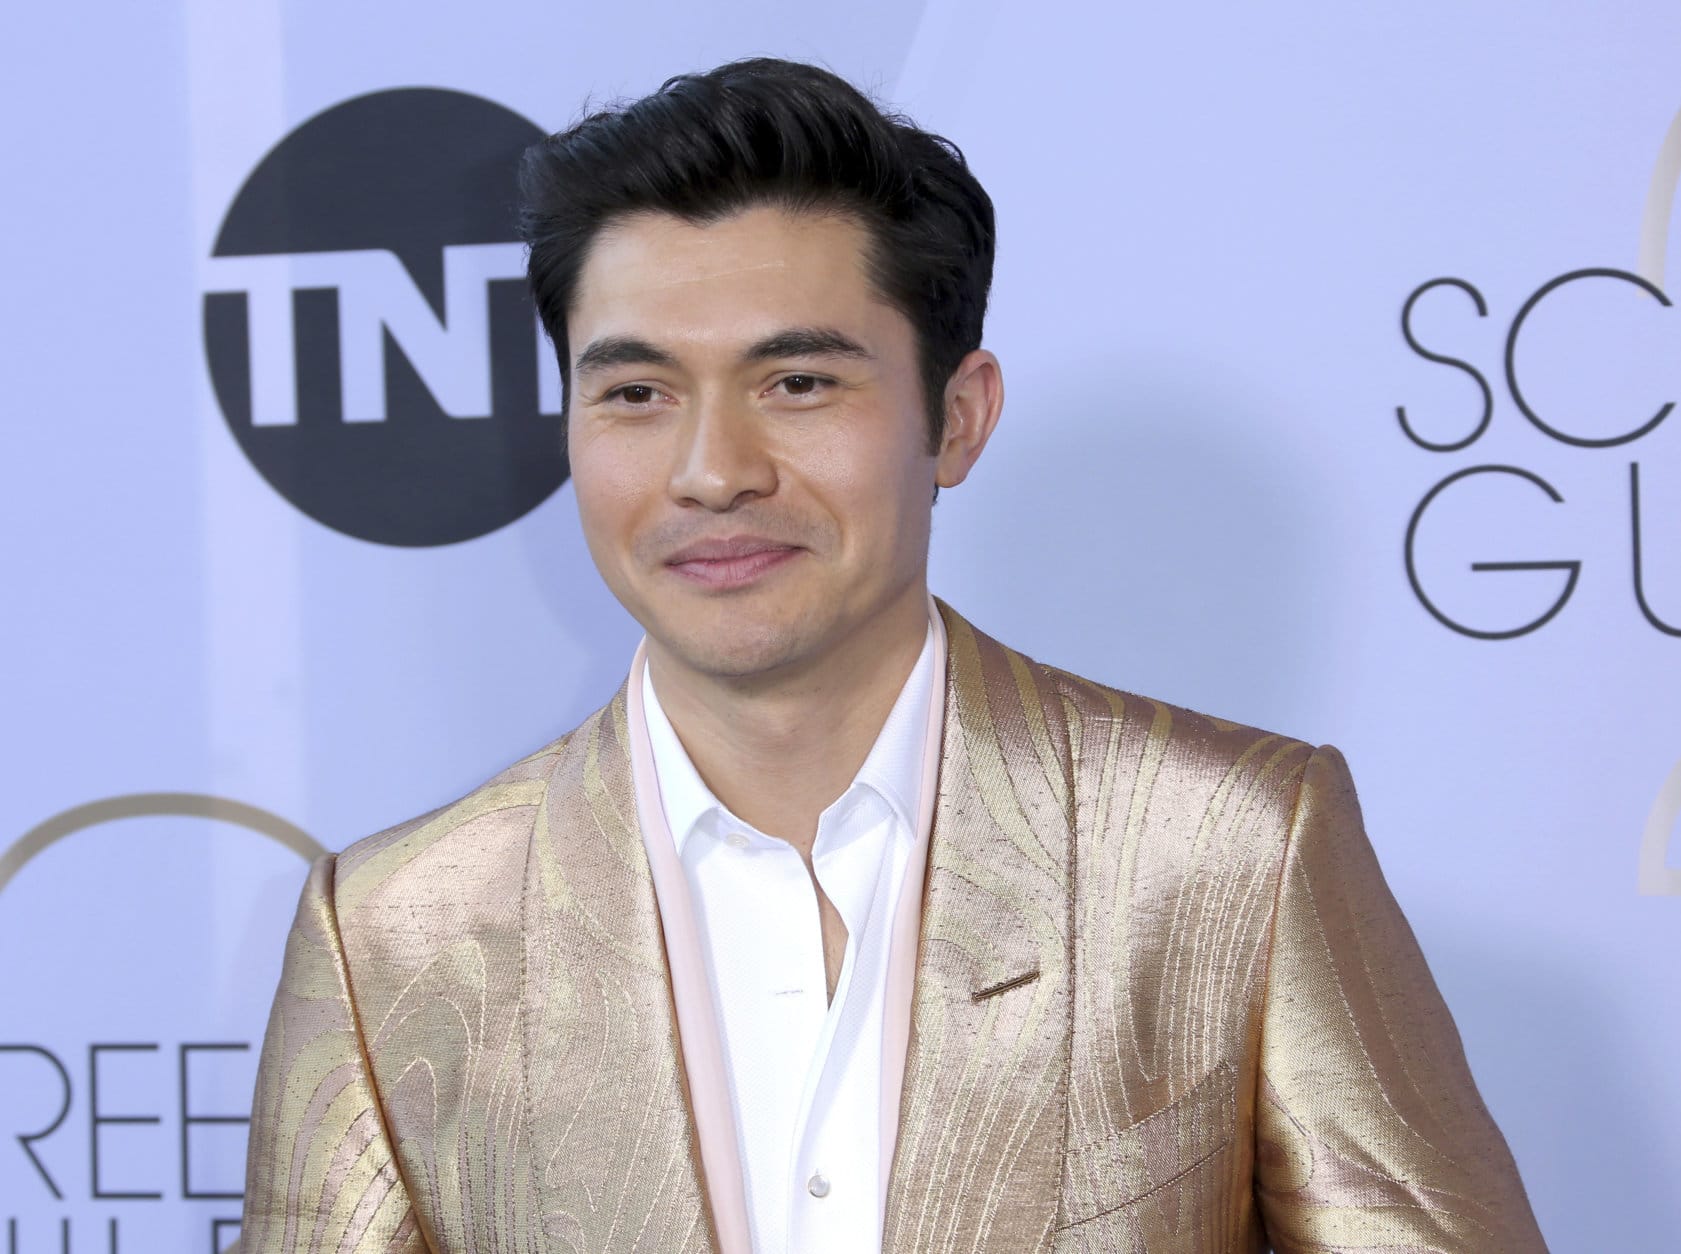 Henry Golding arrives at the 25th annual Screen Actors Guild Awards at the Shrine Auditorium &amp; Expo Hall on Sunday, Jan. 27, 2019, in Los Angeles. (Photo by Willy Sanjuan/Invision/AP)